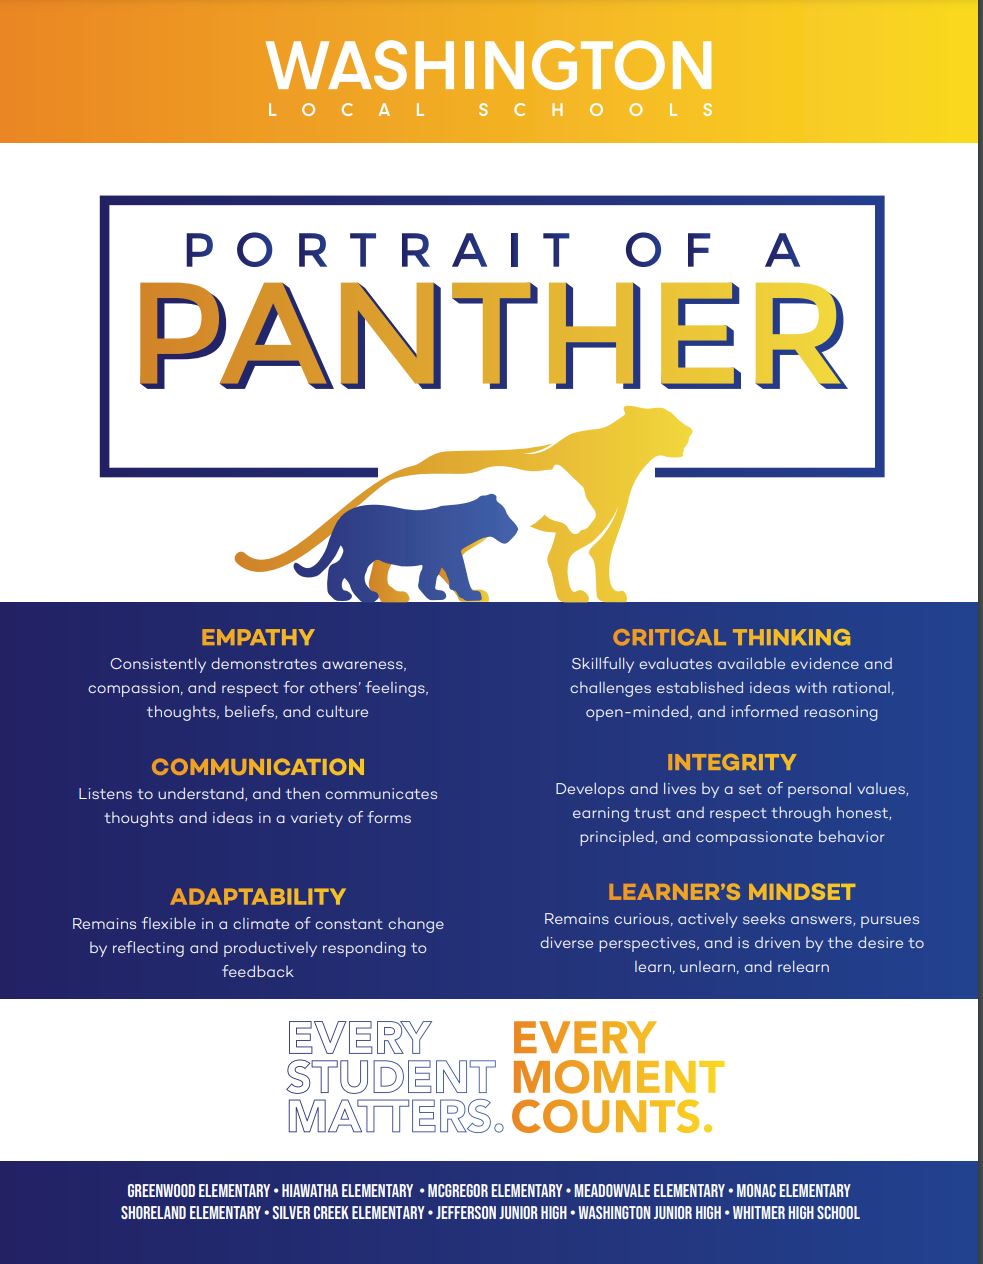 Portrait includes Empathy, Adaptability, Communication, Critical Thinking, Learner's Mindset, Integrity